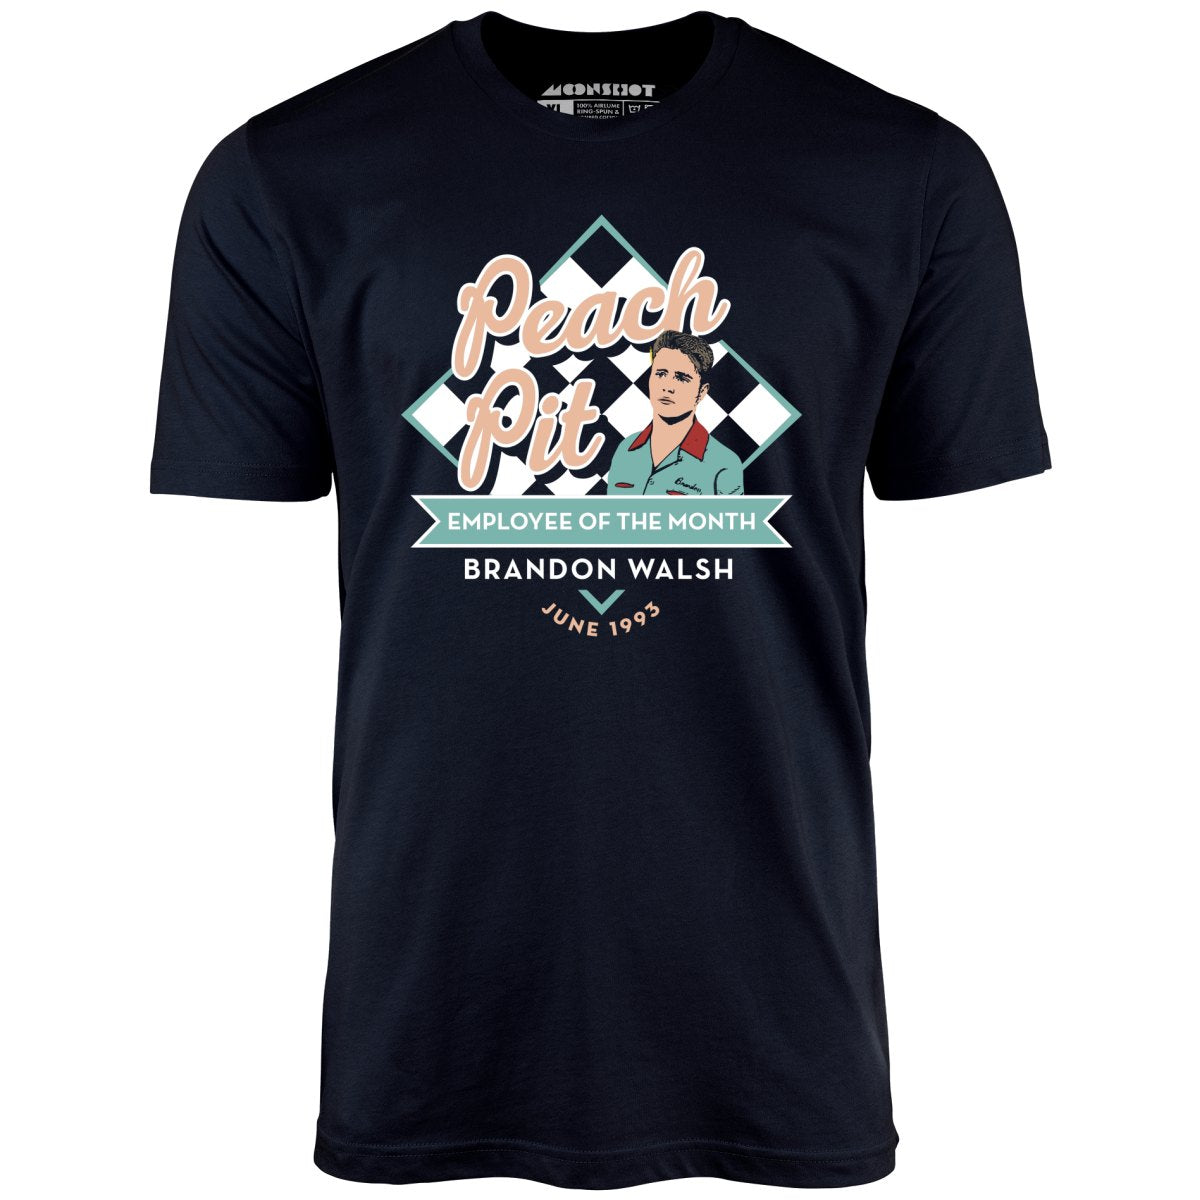 Peach Pit Employee of The Month - 90210 - Unisex T-Shirt